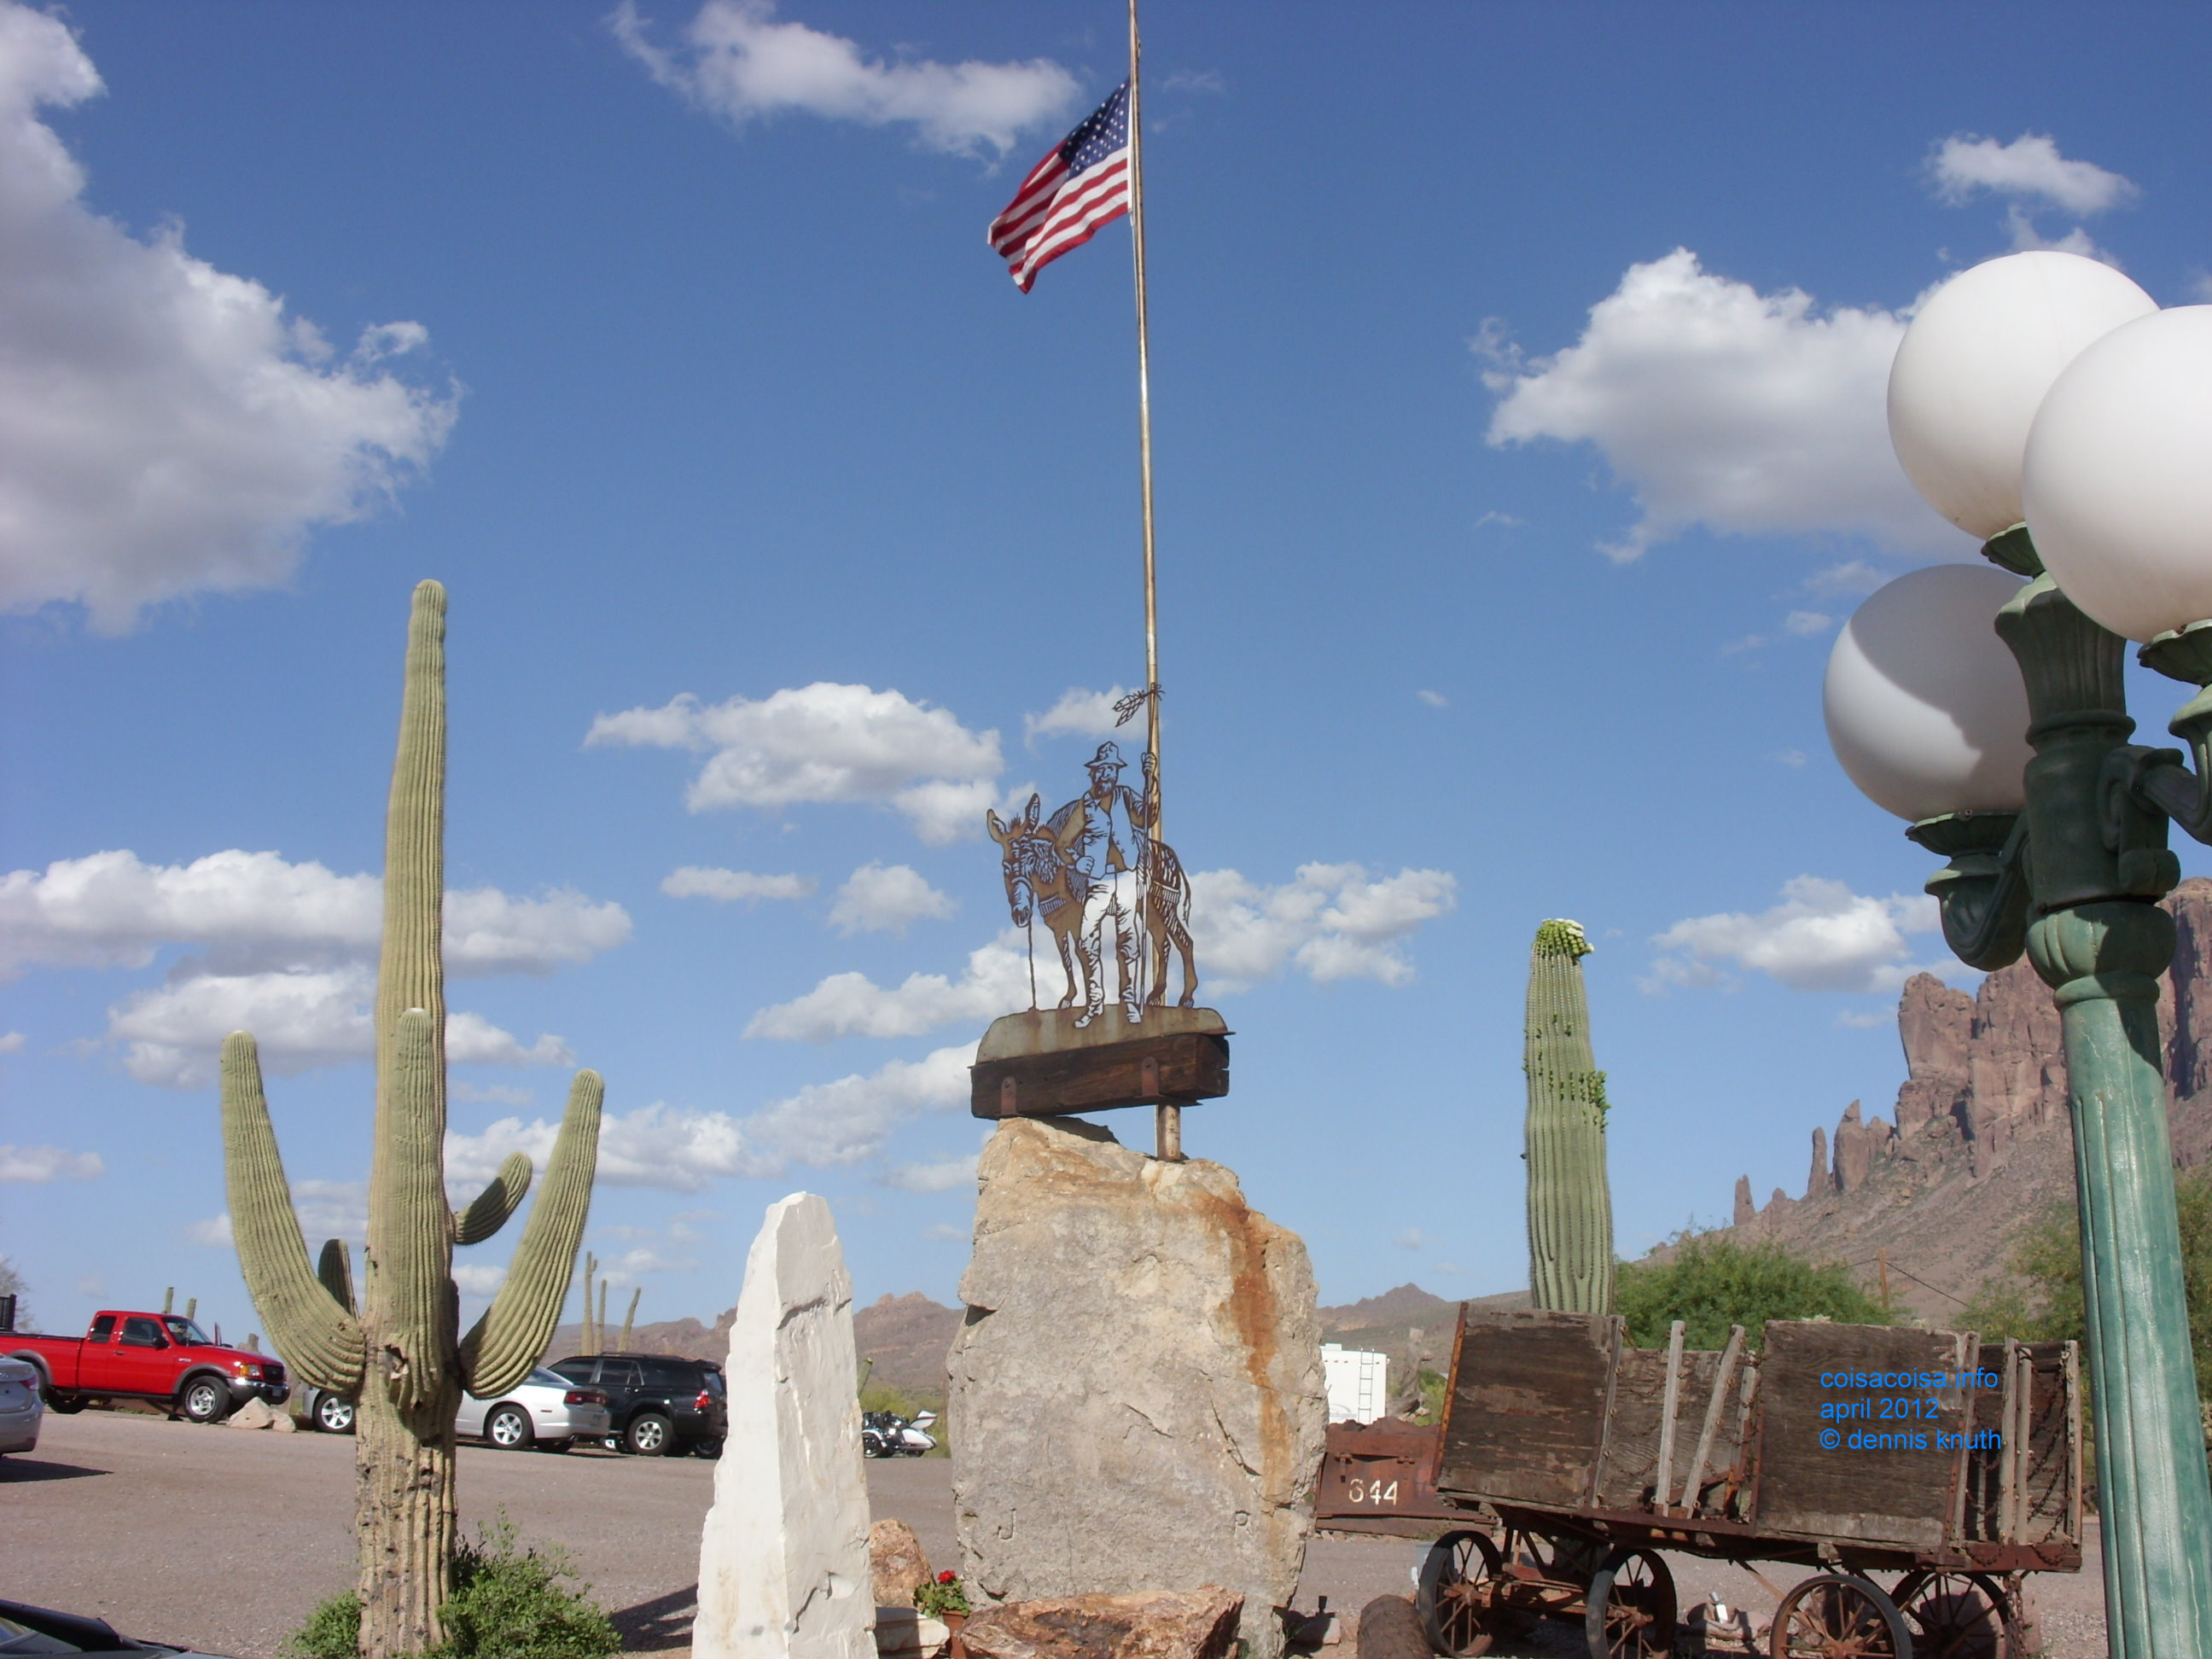 2012_04_26_e_apache_junction_ghost_town_0024.jpg (large)